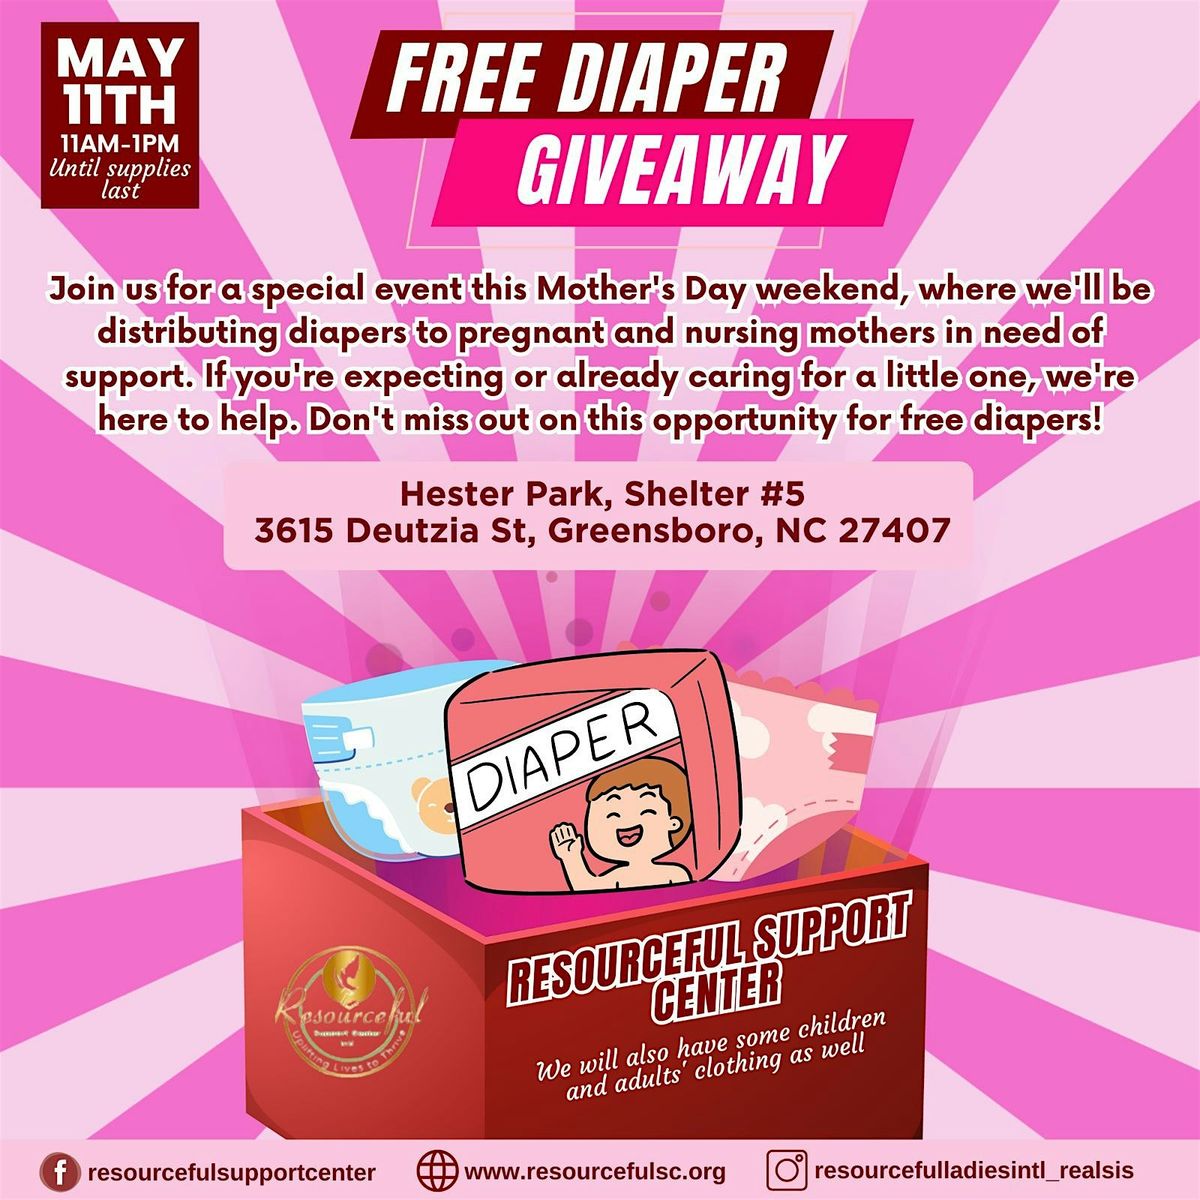 FREE DIAPERS GIVEAWAY